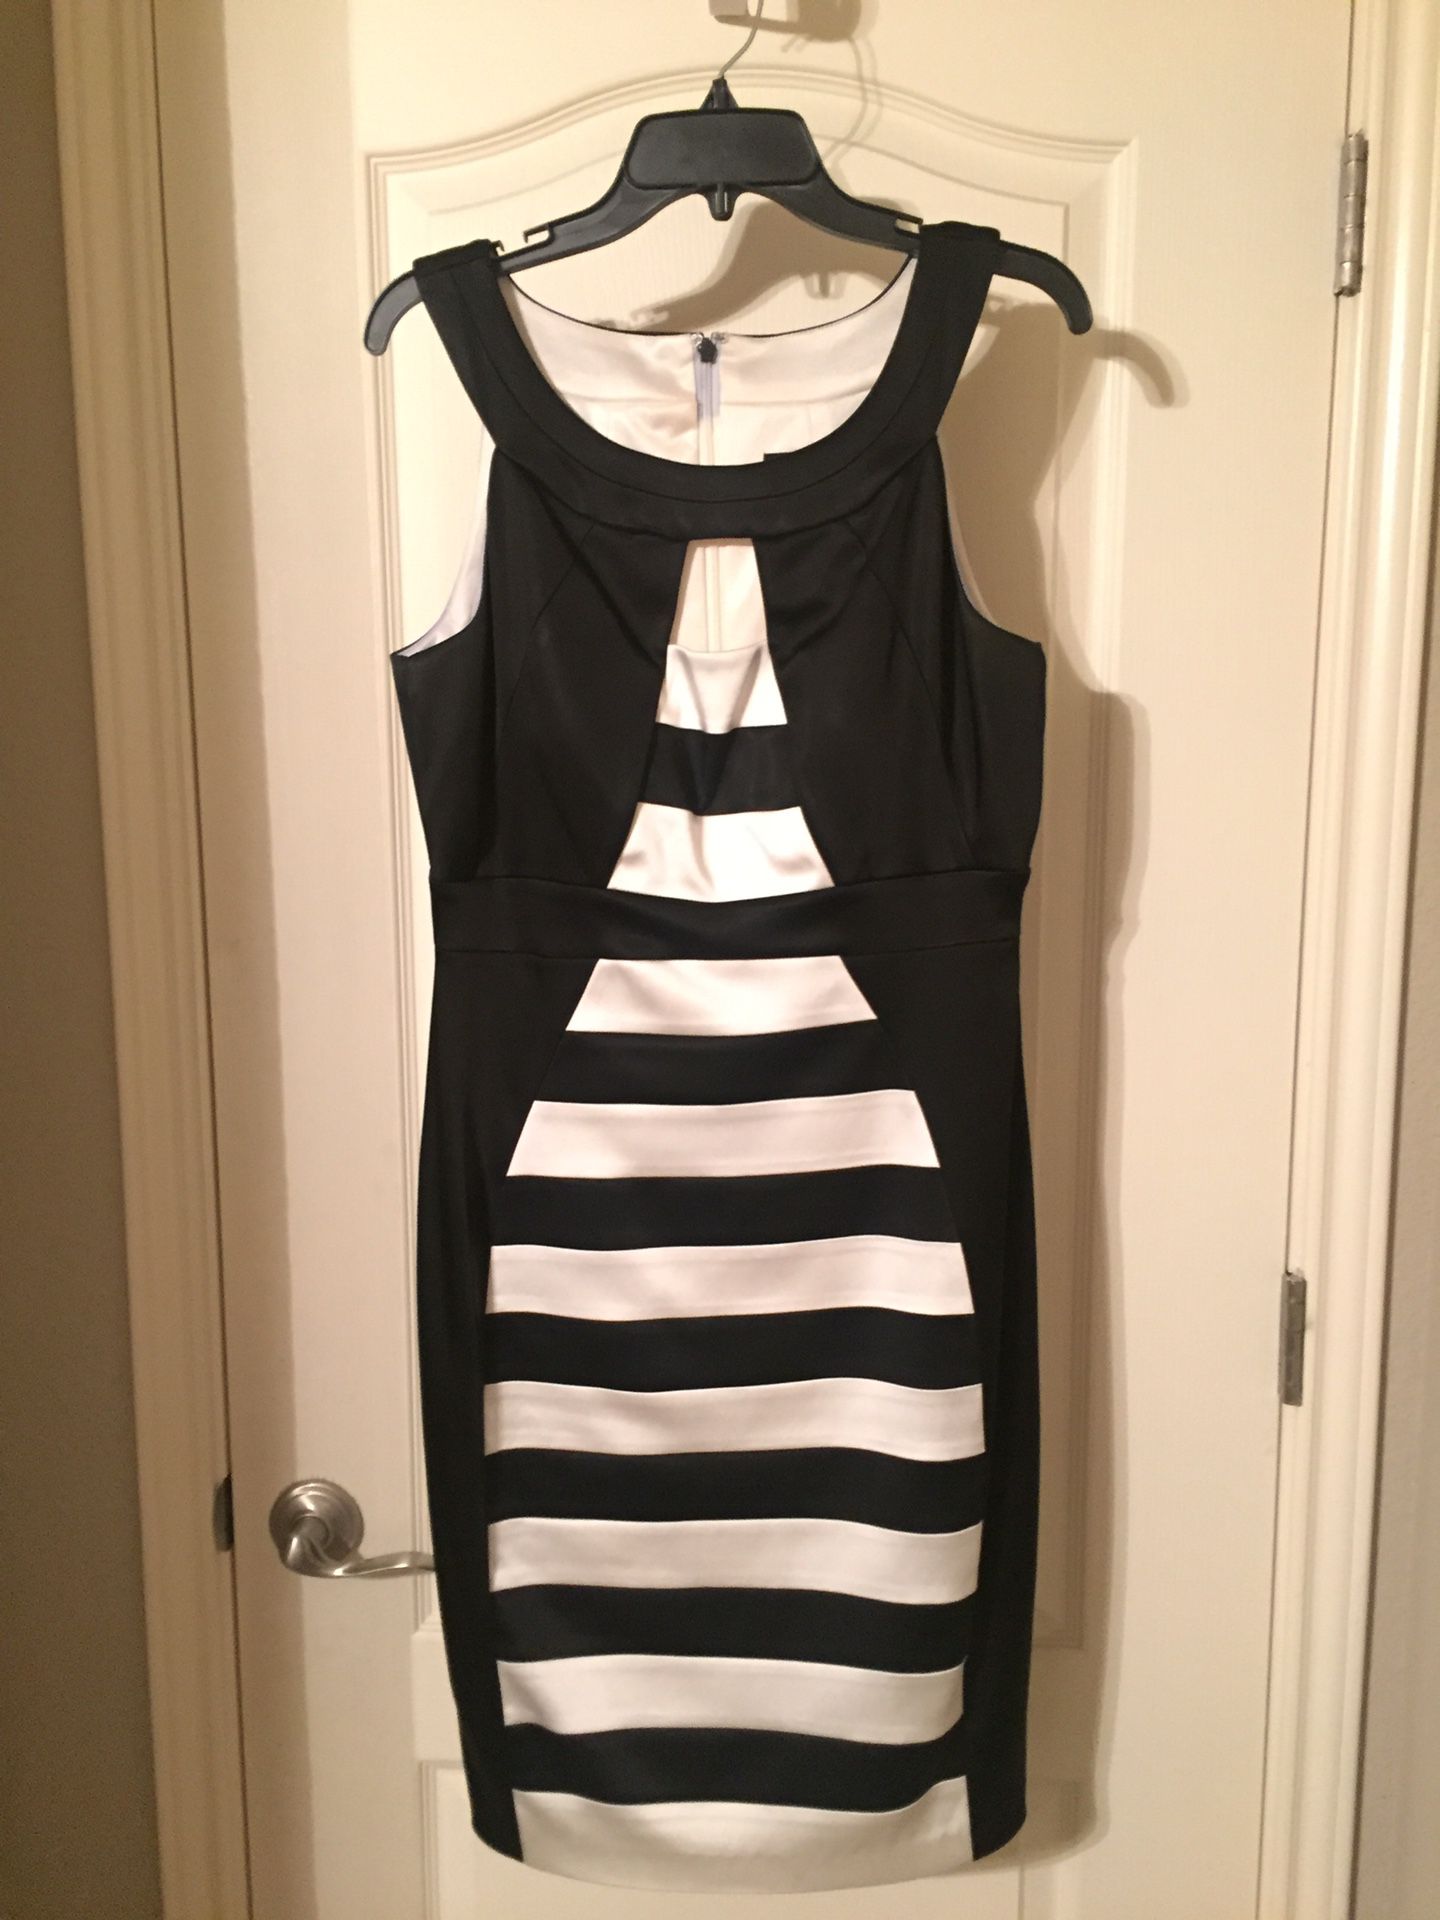 Jax black and white cocktail dress (size 10) - New with tags